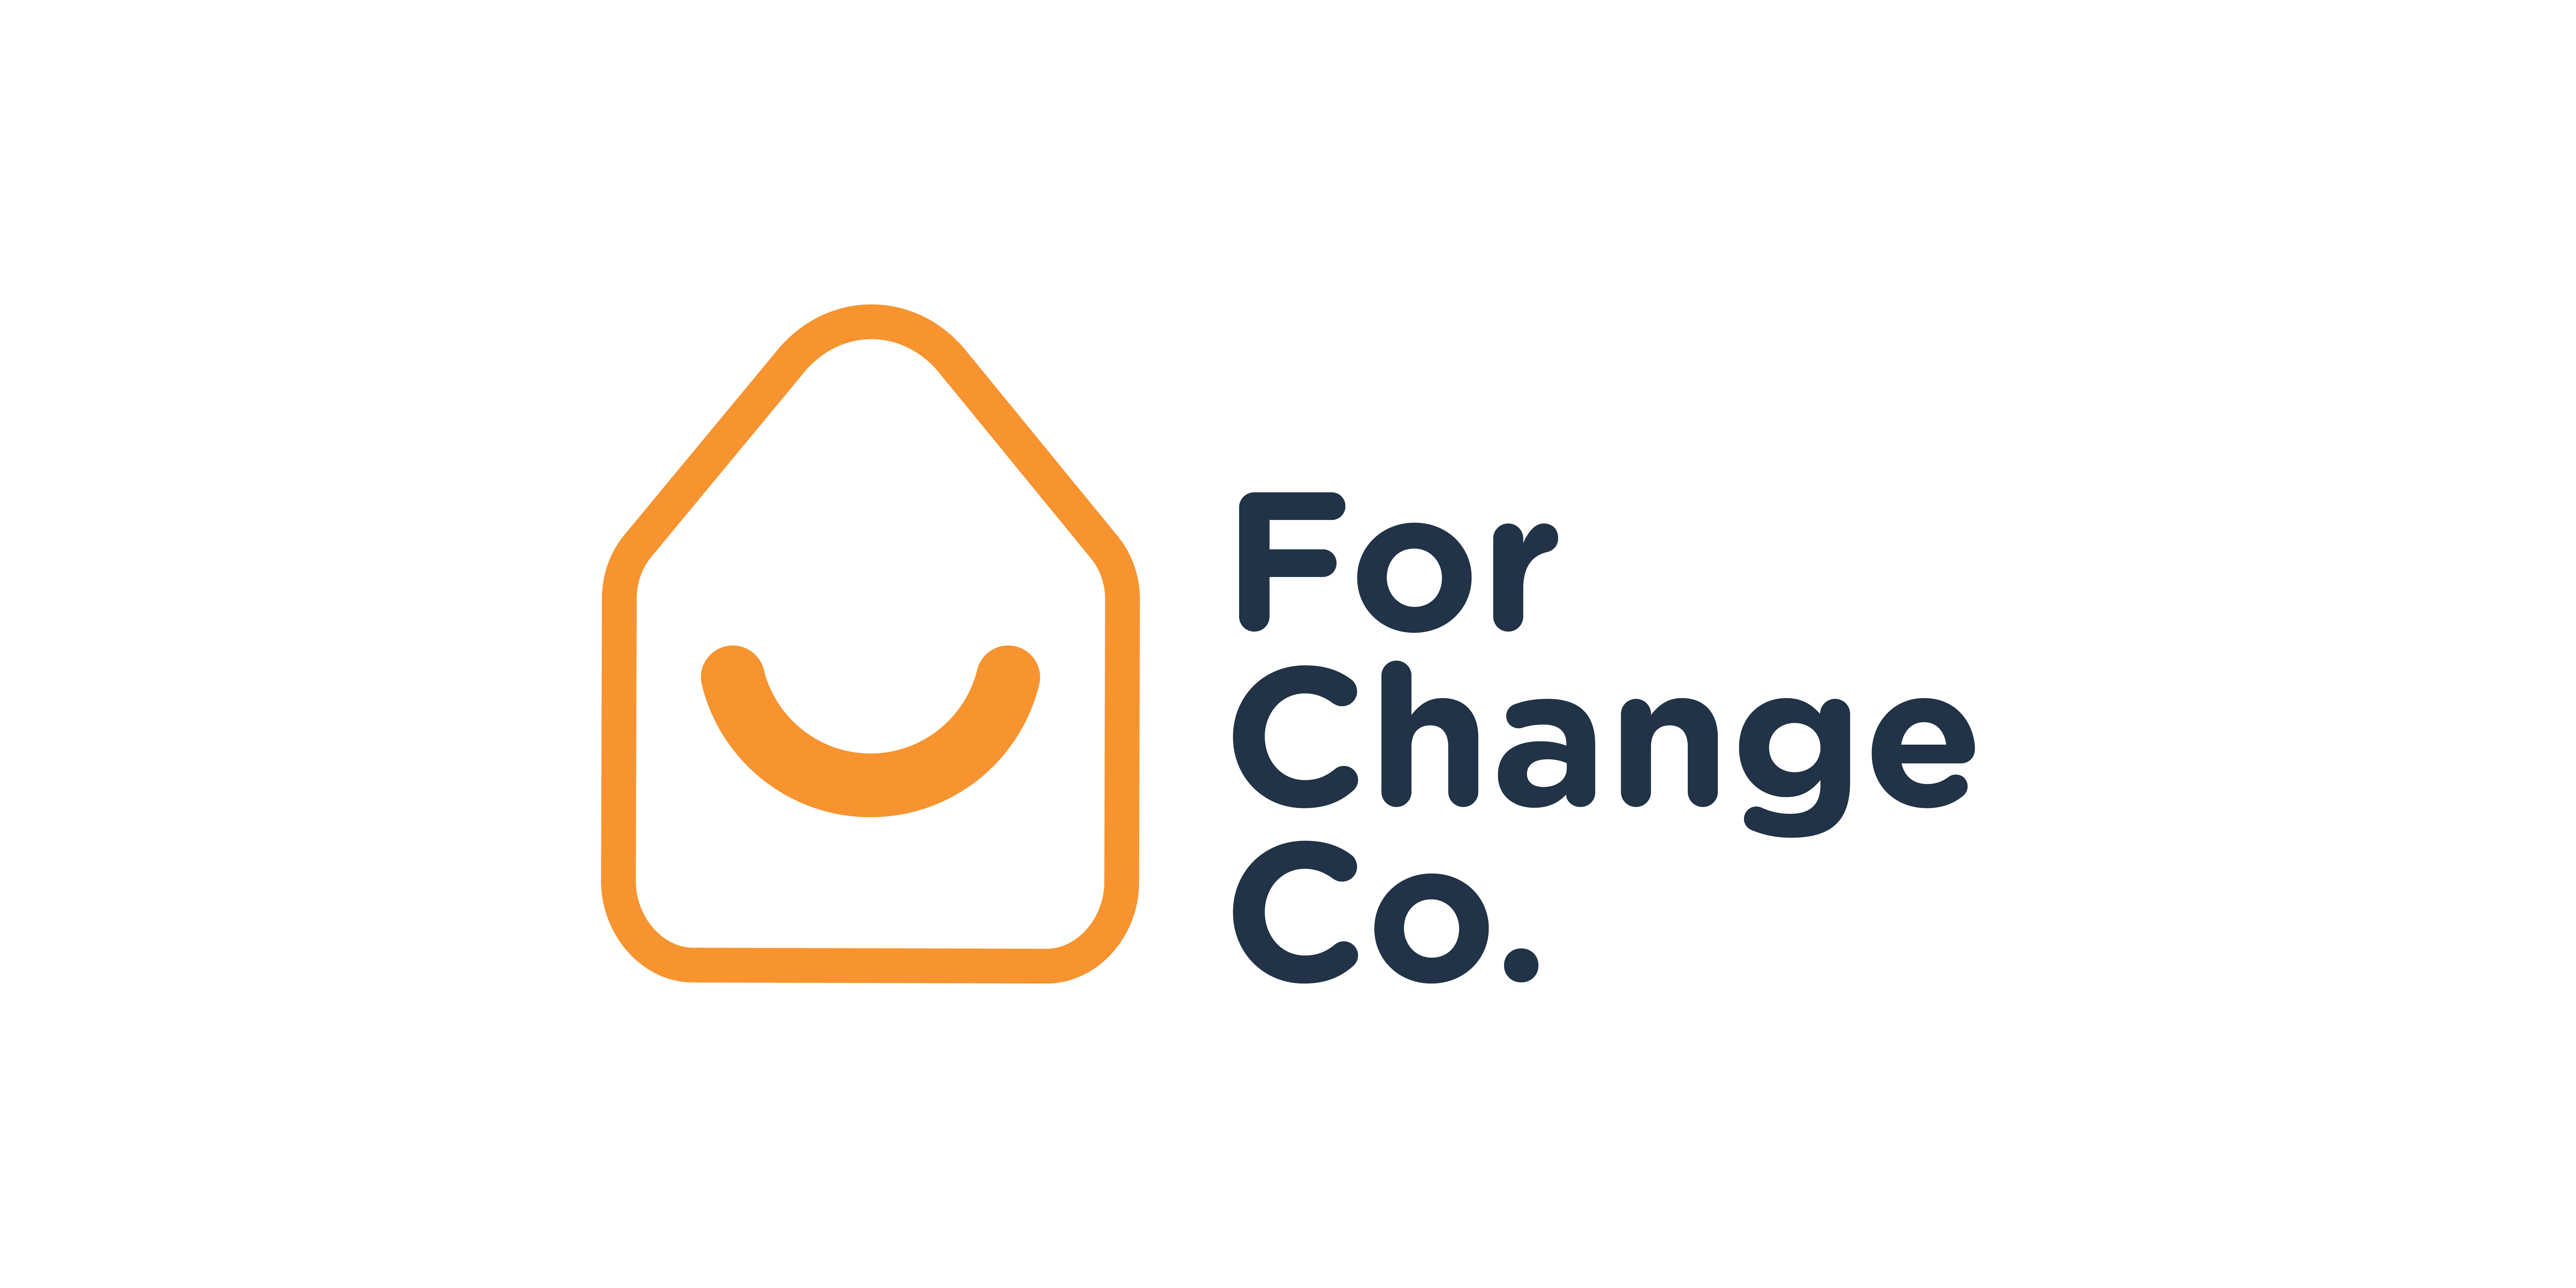 For Change Co